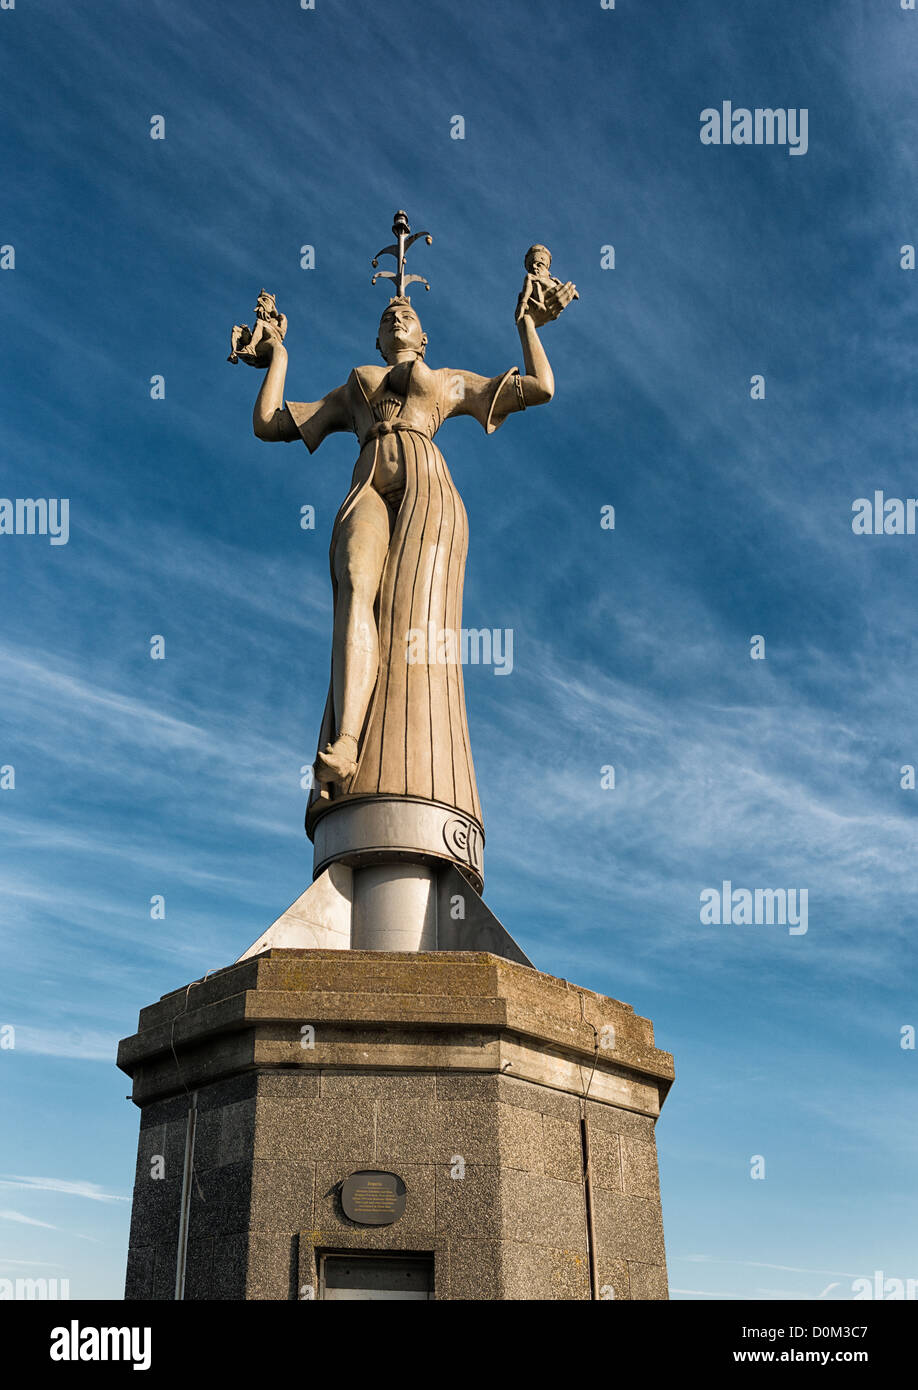 The Statue of Imperia,by artist Peter Lenk,representing the Council inKonstanz Stock Photo